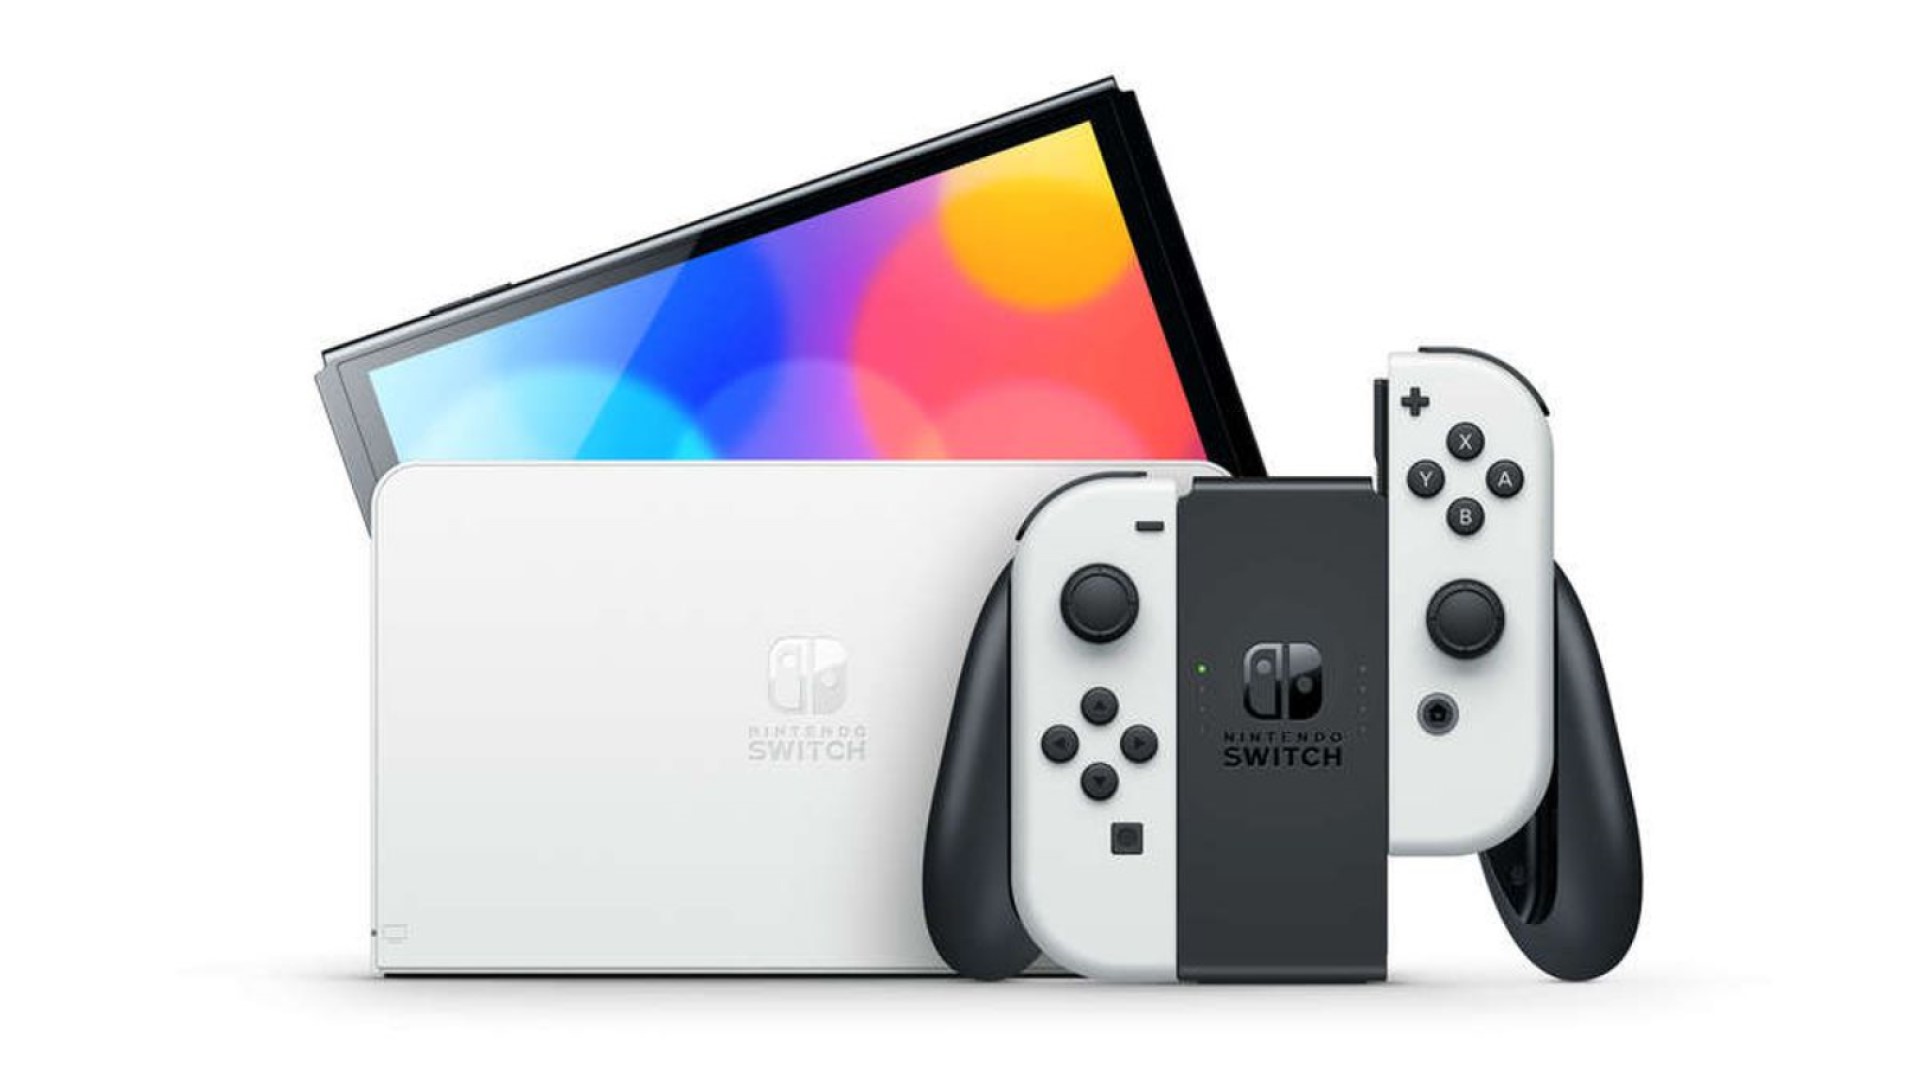 What Going On With the Switch Pro?